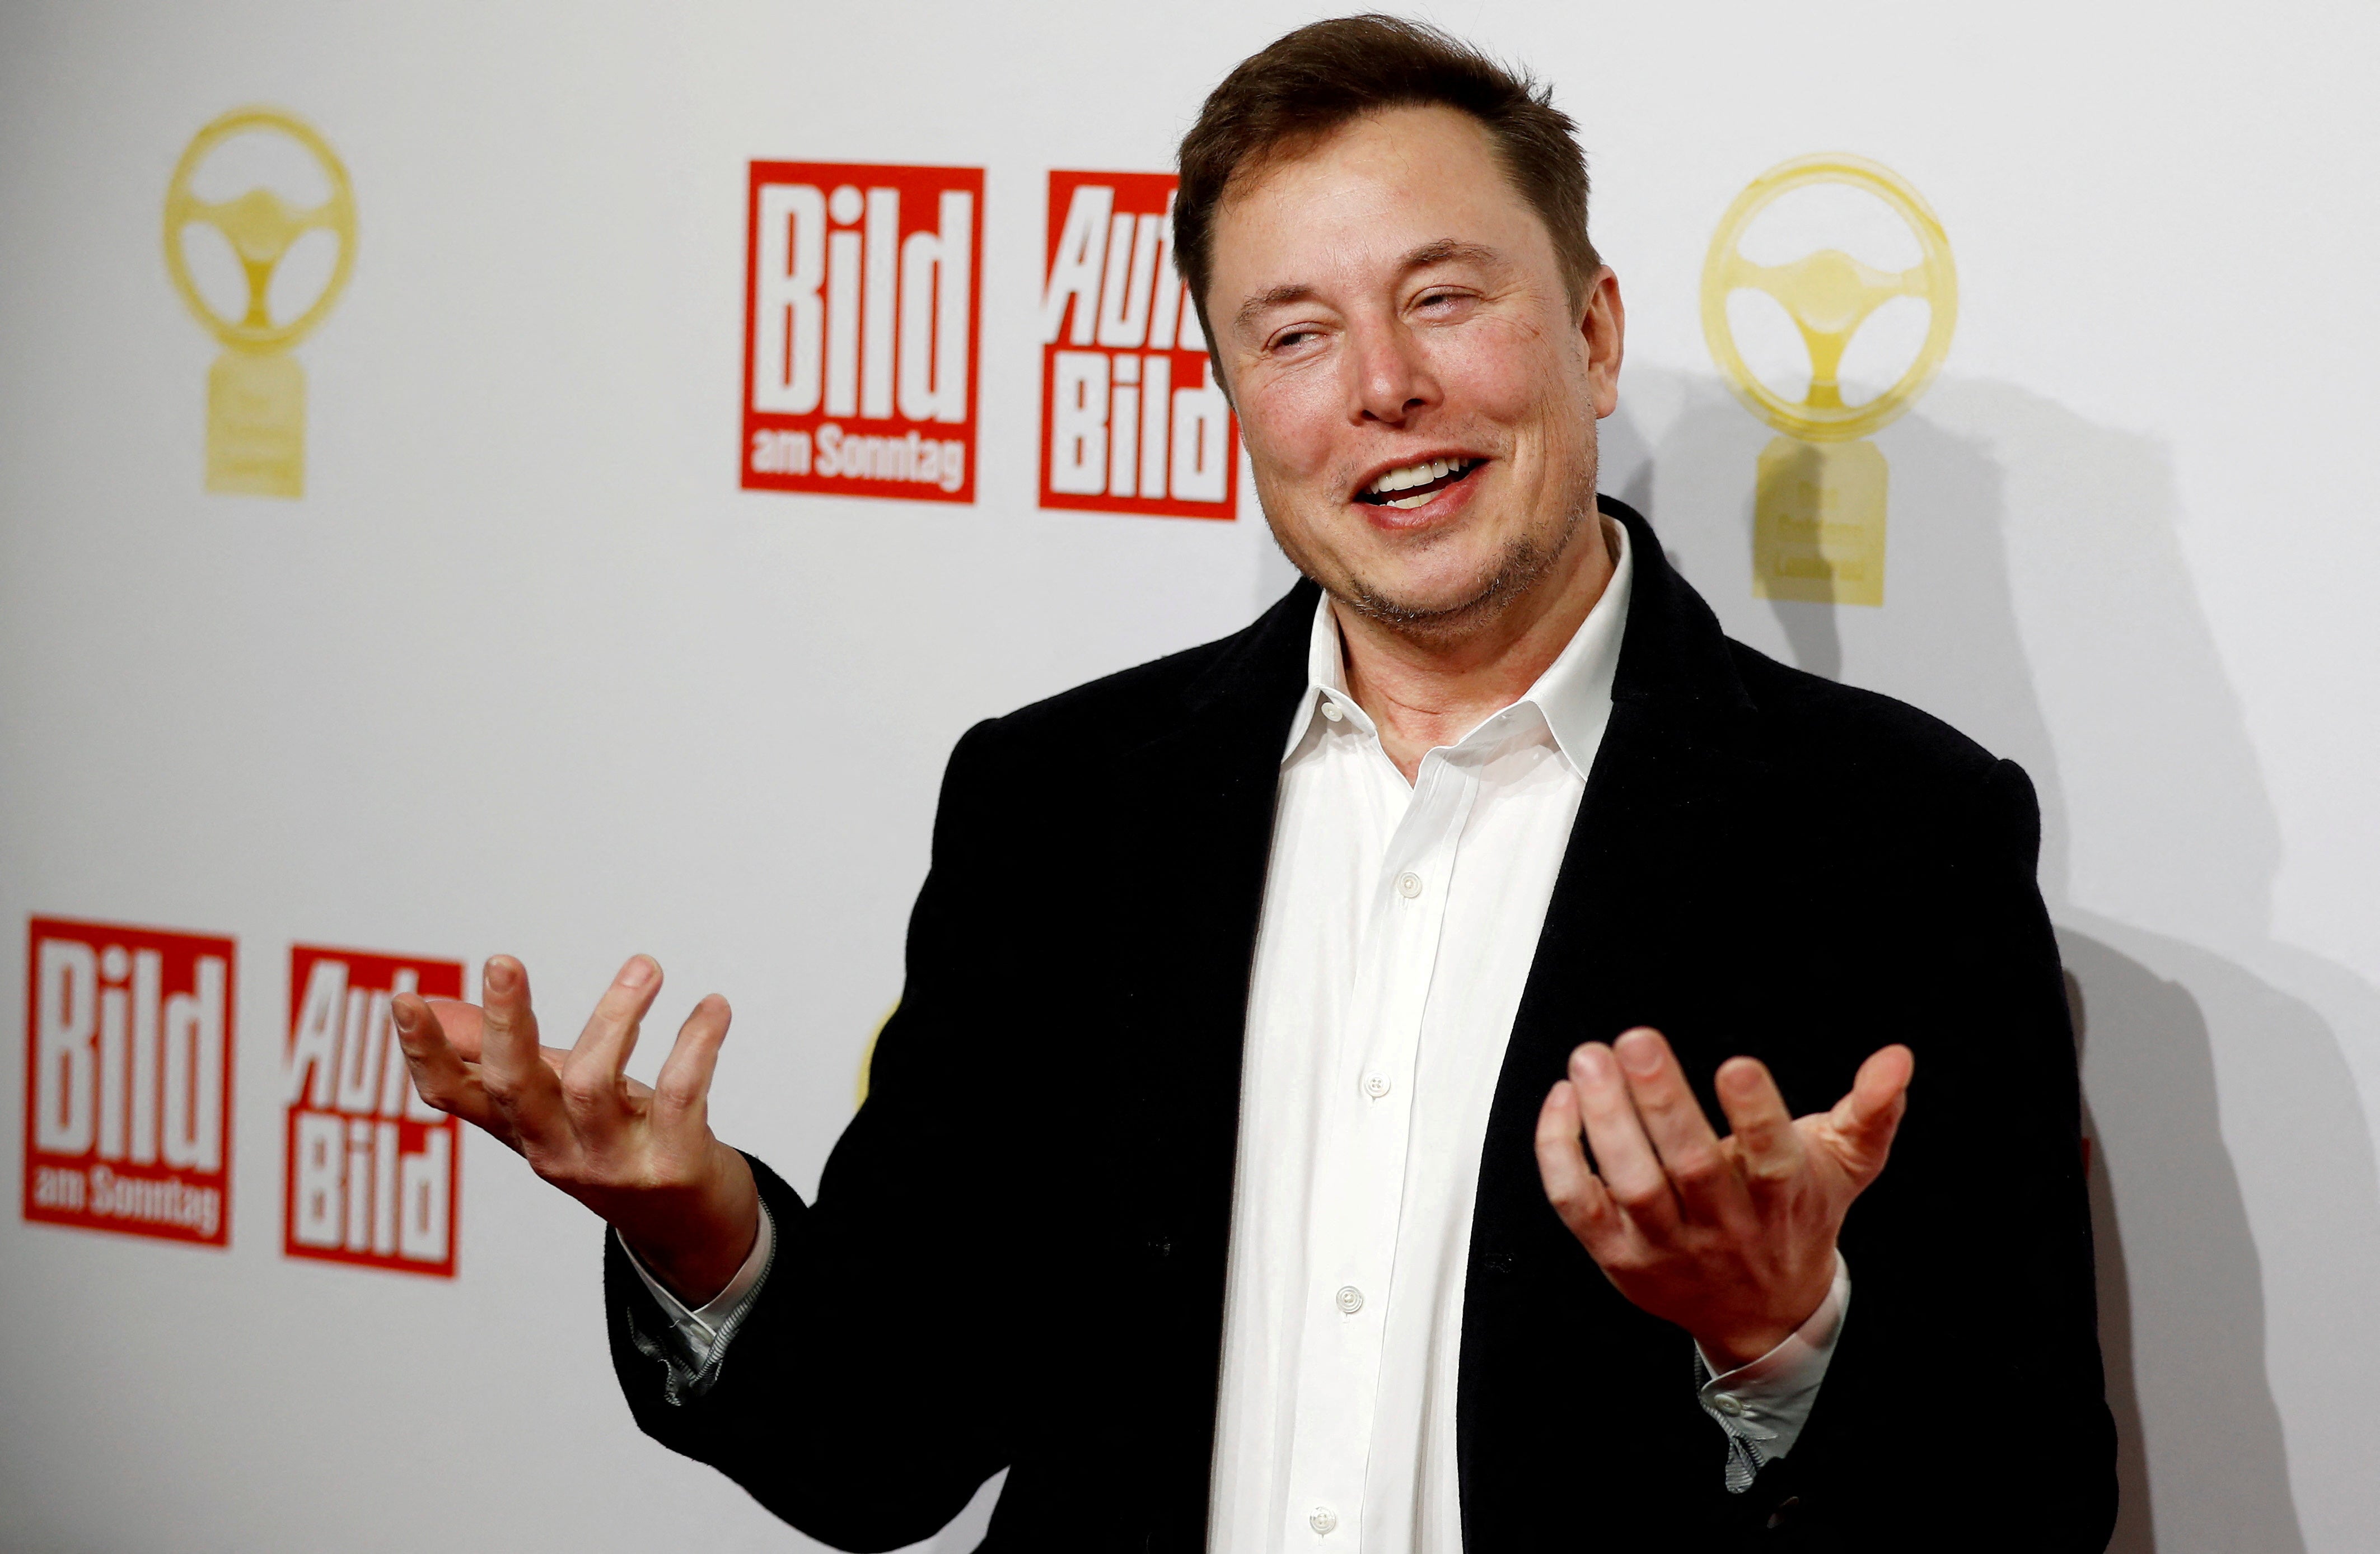 Bad timing? Elon Musk paid the equivalent of a dollar a second for 1,408 years to buy Twitter